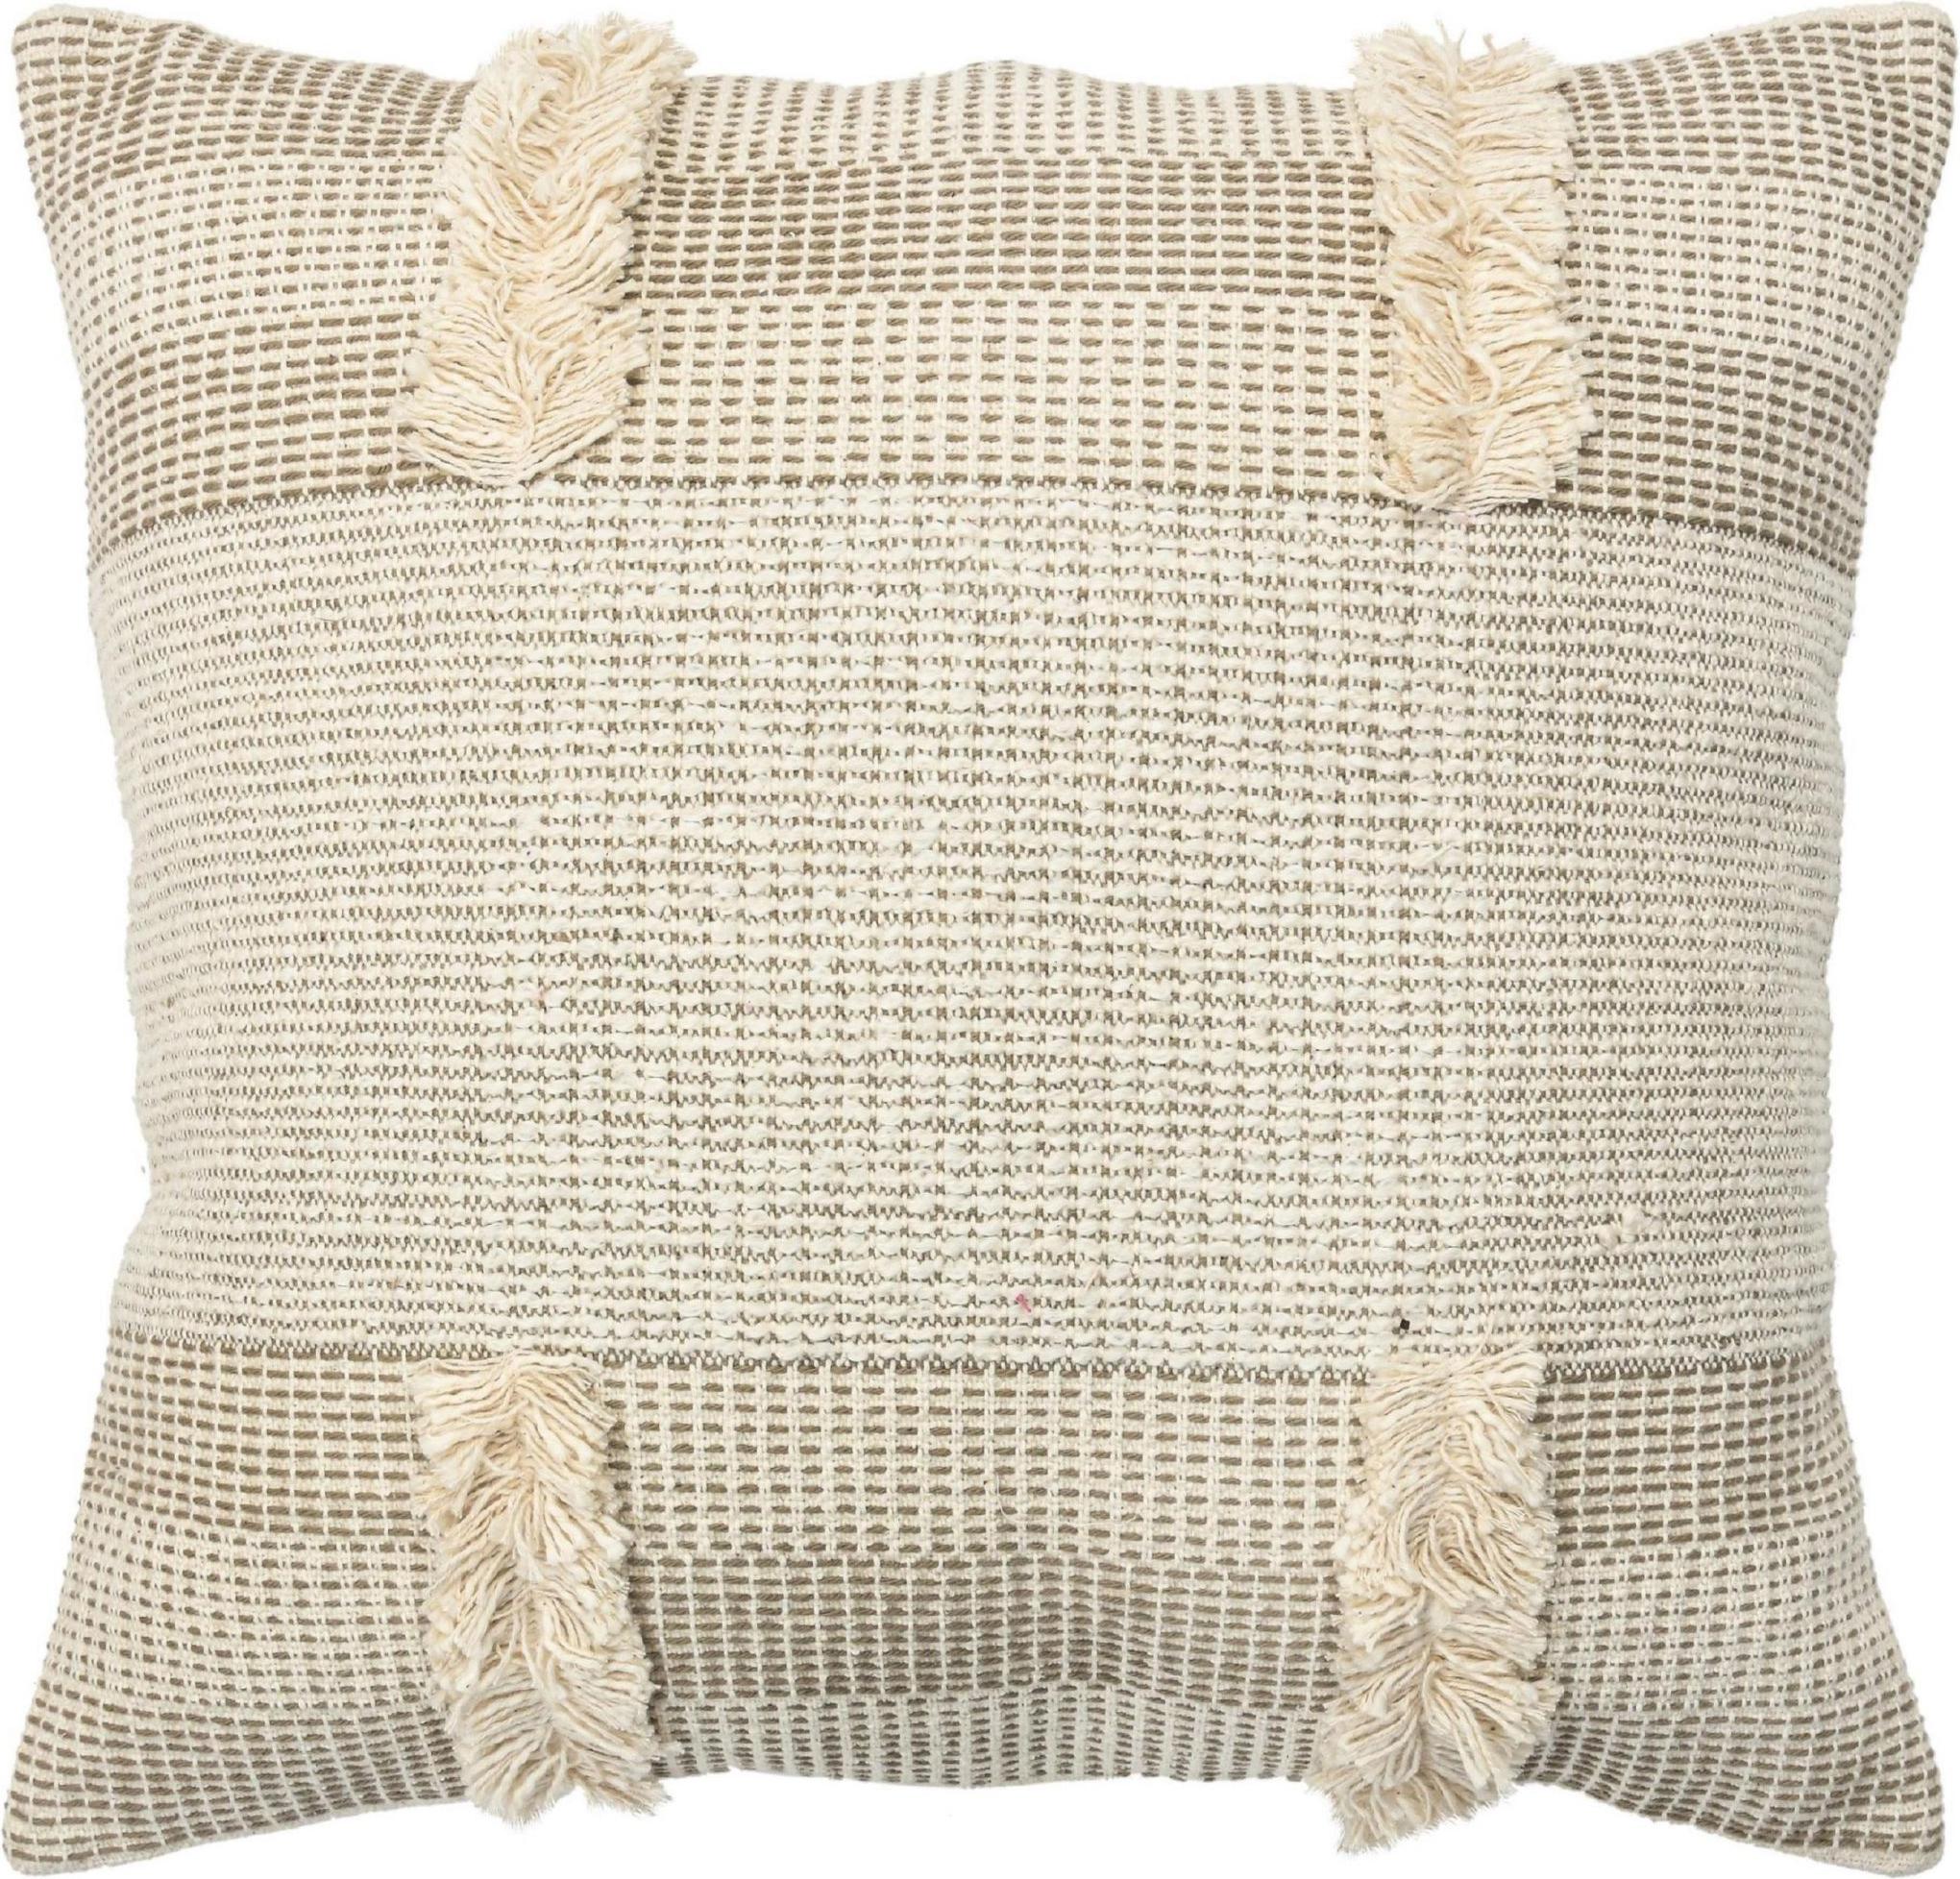 Indian Beige Boho Chic Style Contemporary Wool and Cotton Pillow For Sale